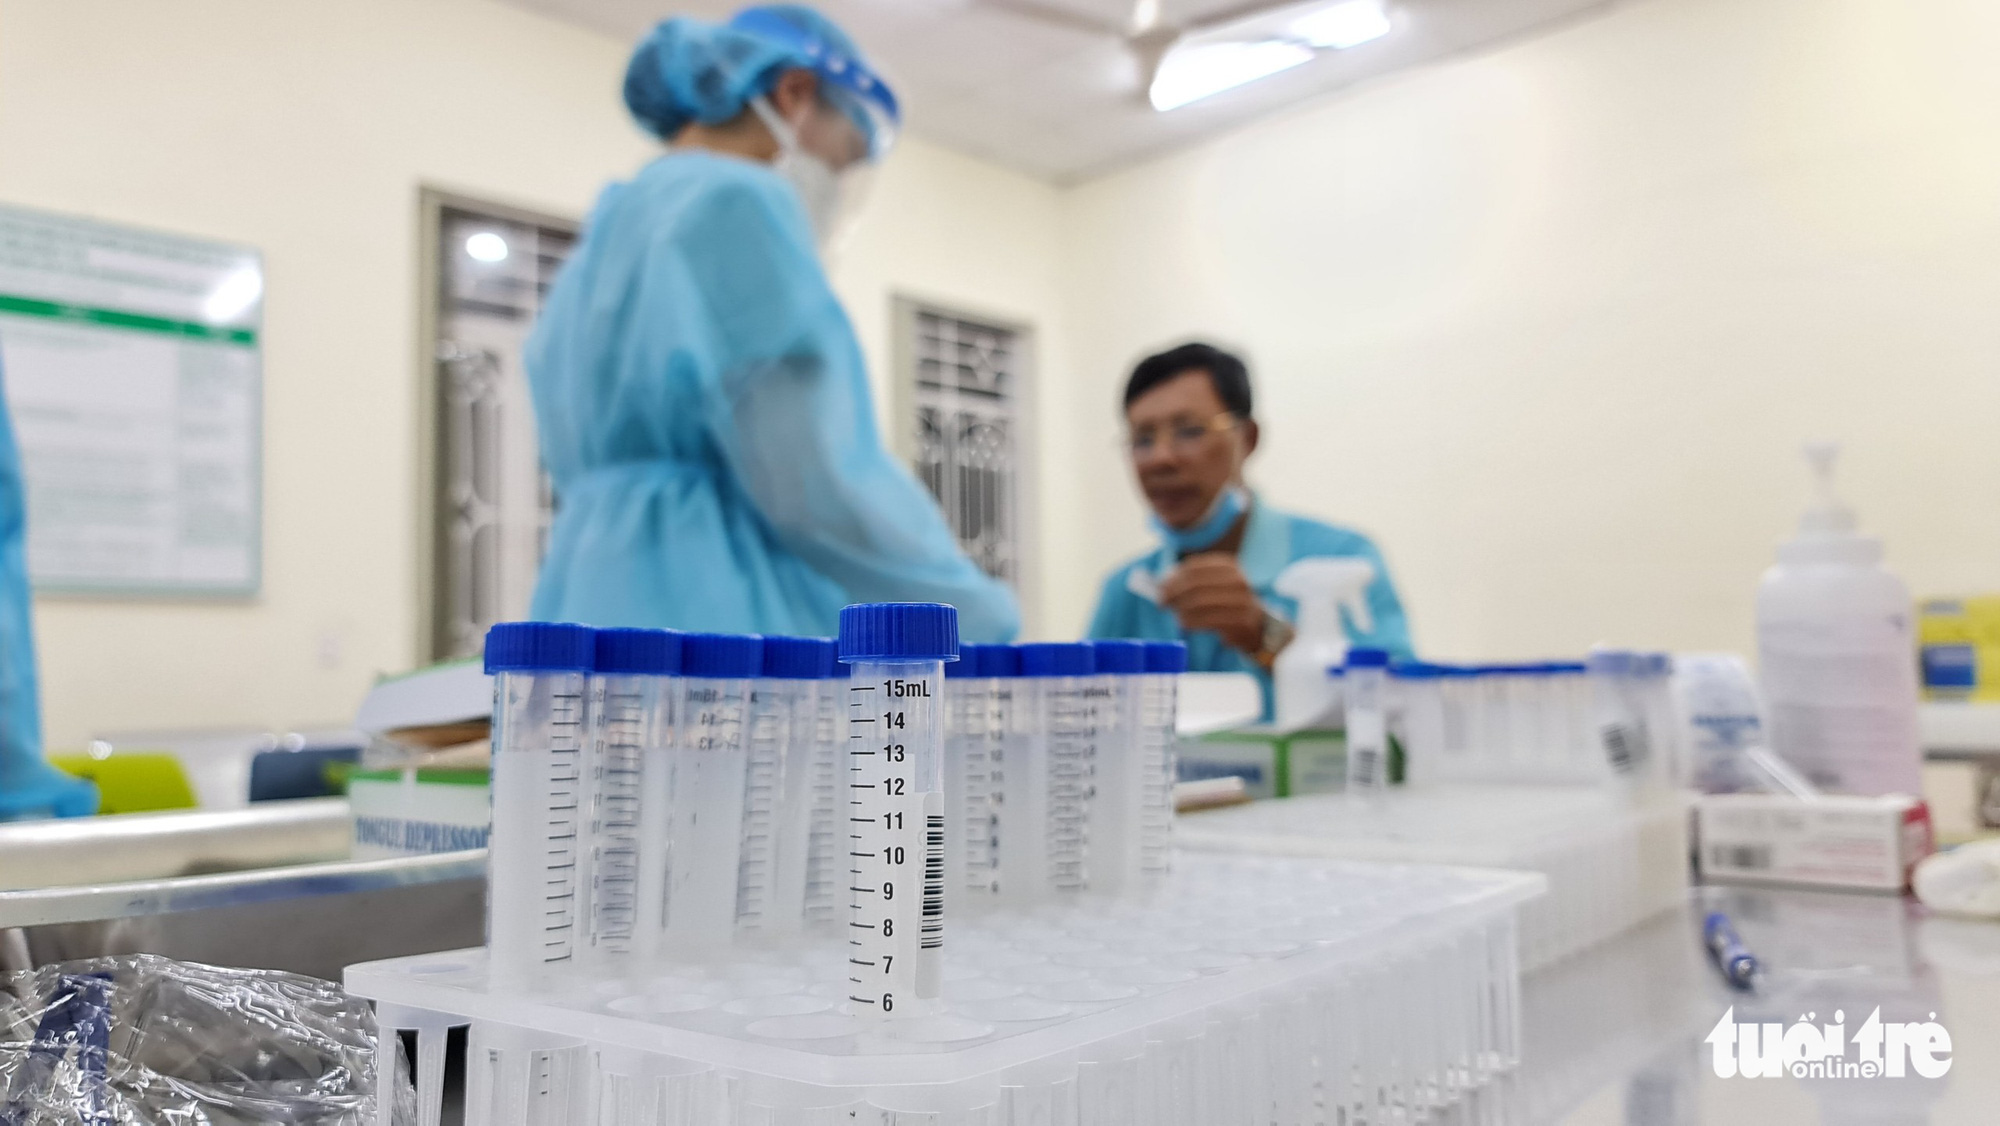 COVID-19 tests are performed at 175 Military Hospital in Ho Chi Minh City, February 8, 2021. Photo: Tran Chinh / Tuoi Tre